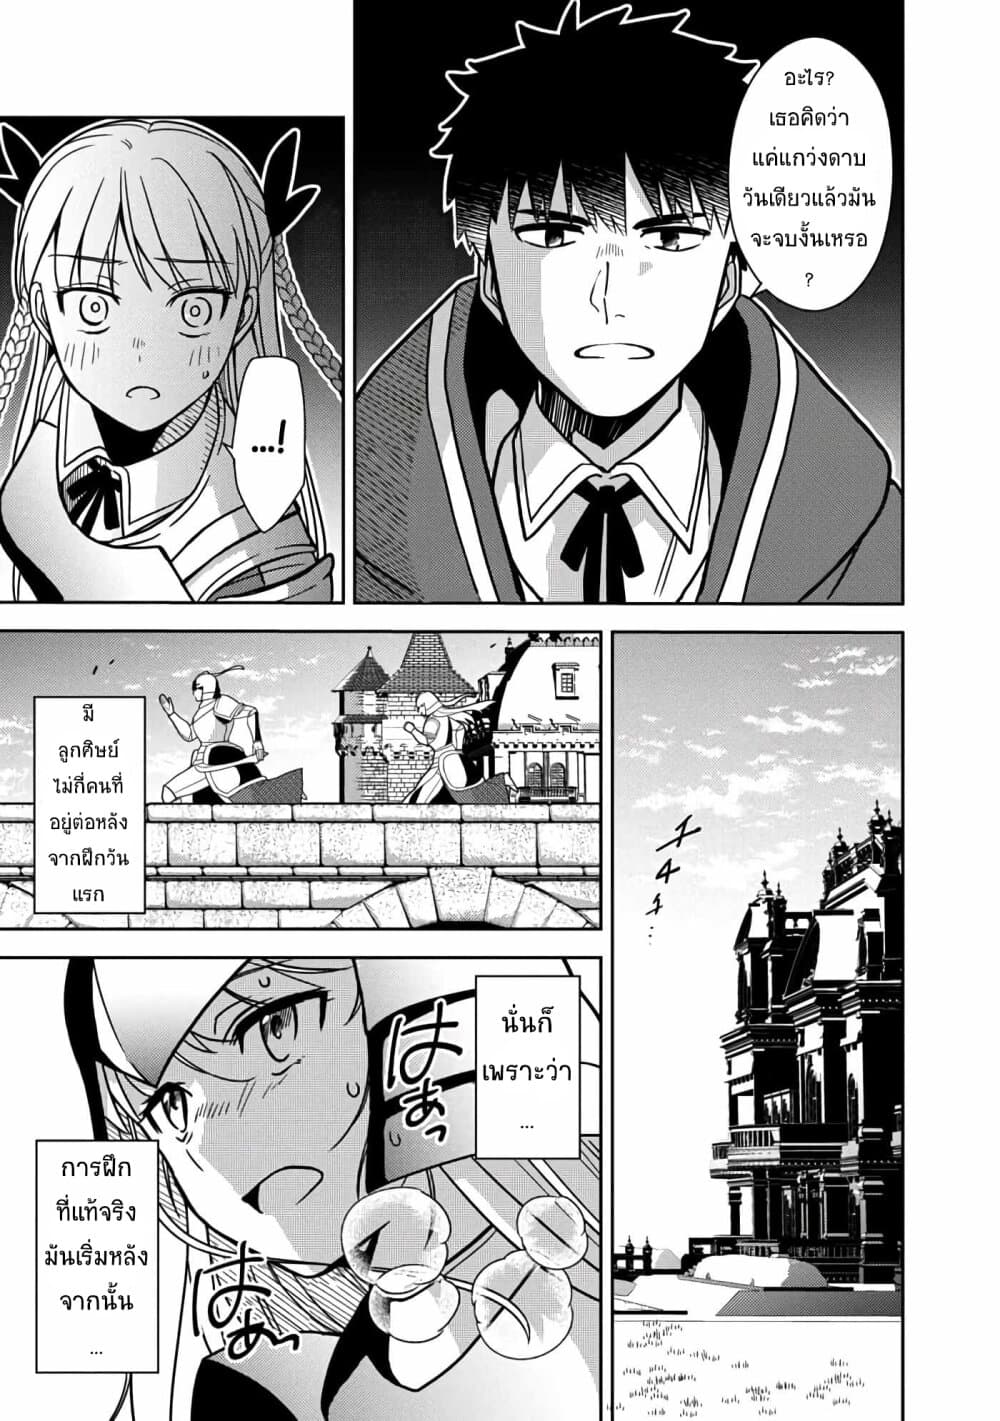 The Reincarnated Swordsman With 9999 Strength Wants to Become a Magician! ตอนที่ 4.1 (14)